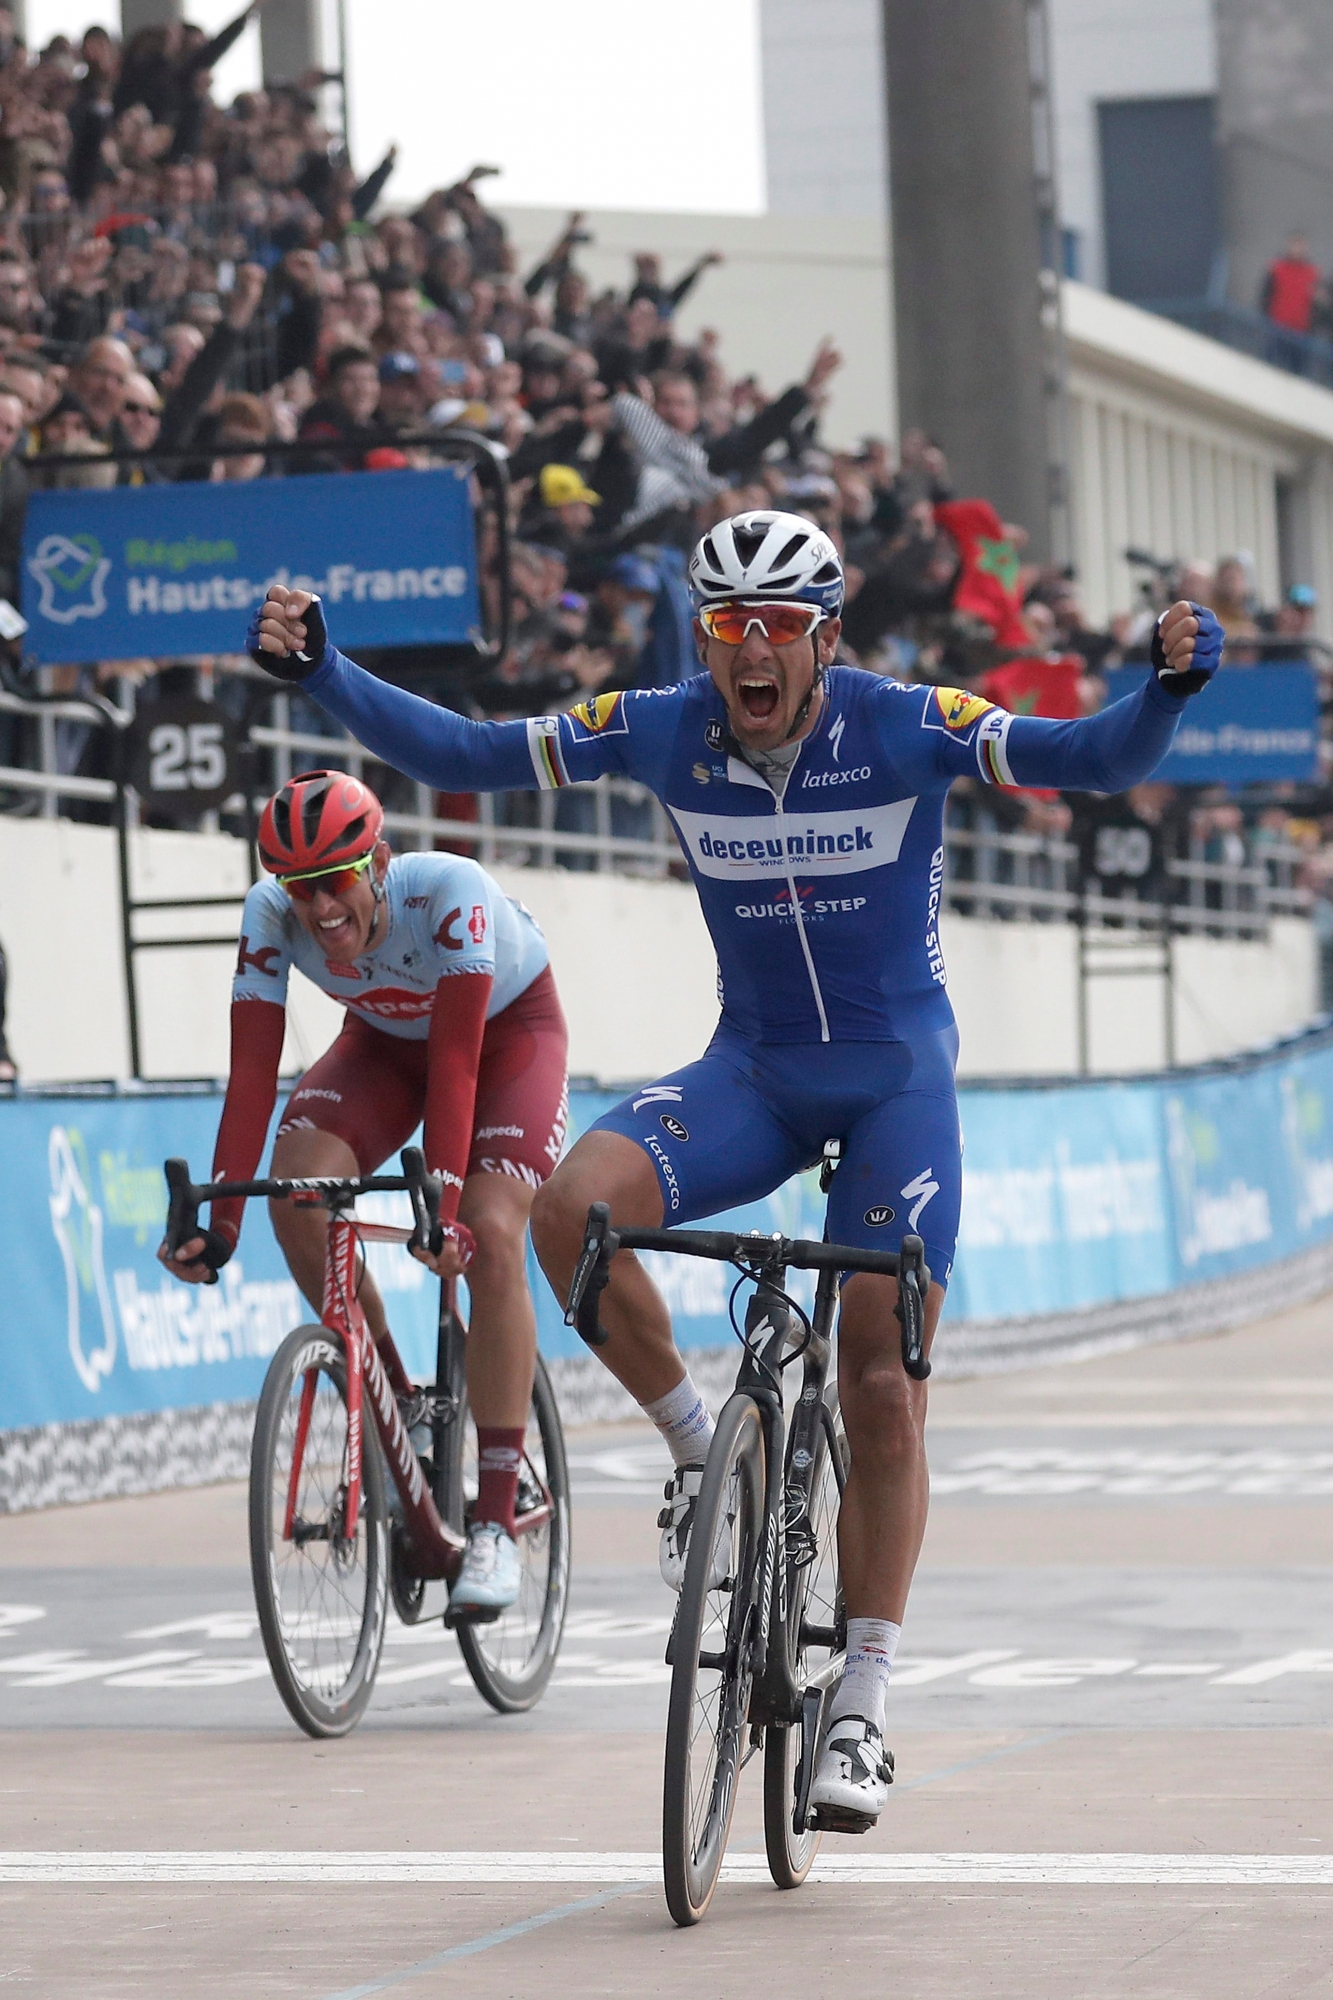 epa07506516 Deceuninck Quick Step team rider Philippe Gilbert (R) of Belgium celebrates his win as he crosses the finish line of the 117th Paris Roubaix cycling race, France, 14 April 2019. Team Katusha Alpecin Nils Politt (L) finishes with second position.  EPA/CHRISTOPHE PETIT TESSON FRANCE CYCLING PARIS ROUBAIX 2019